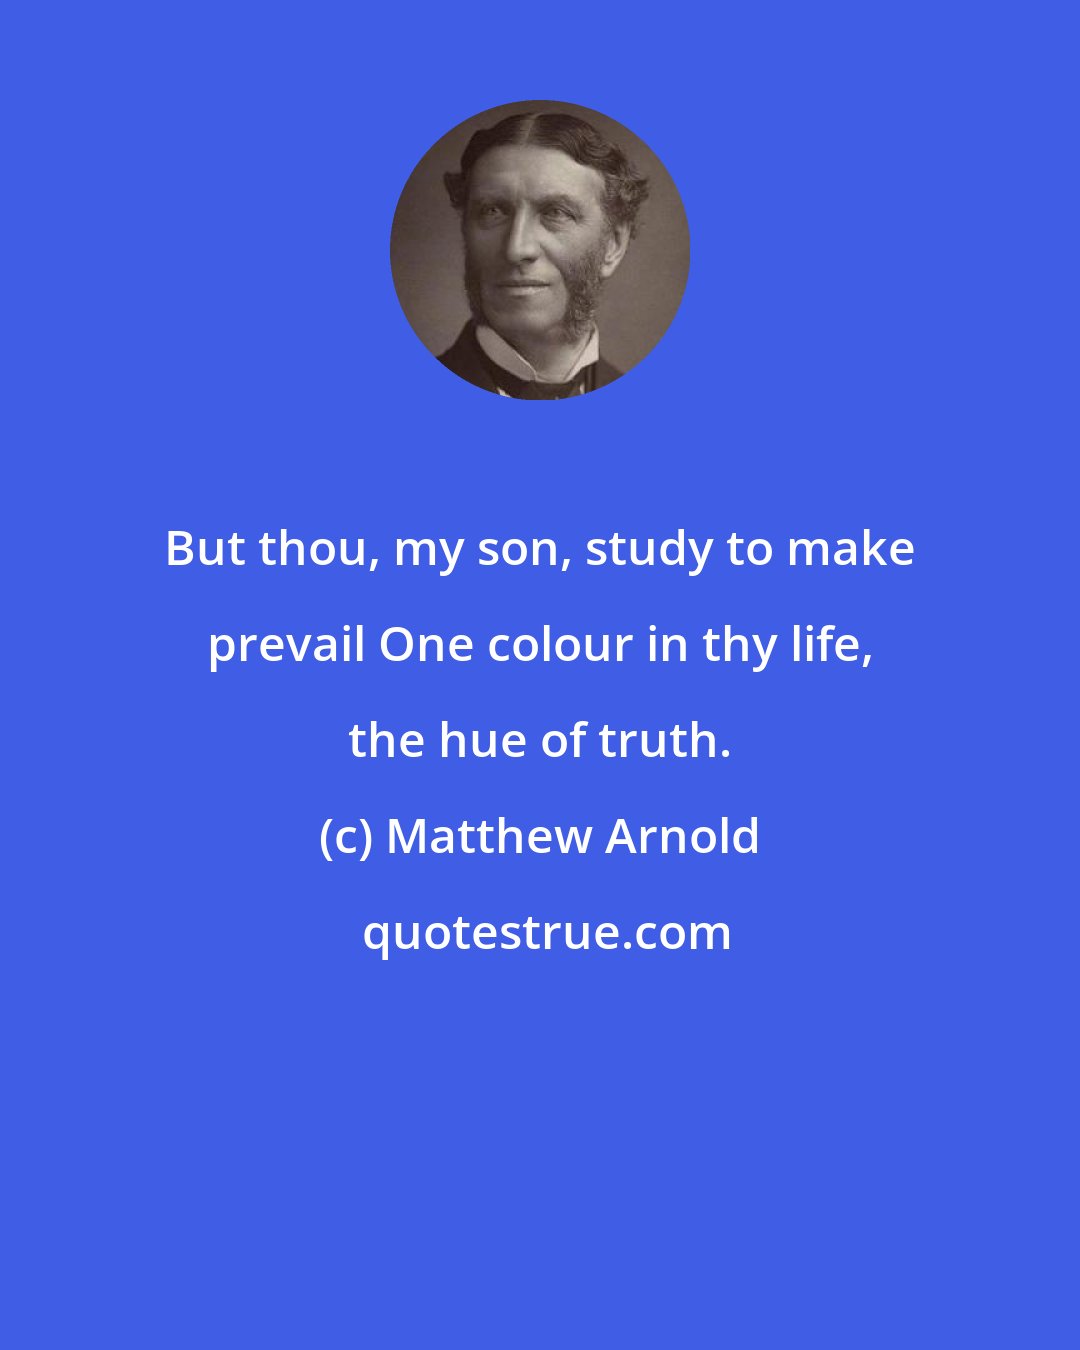 Matthew Arnold: But thou, my son, study to make prevail One colour in thy life, the hue of truth.